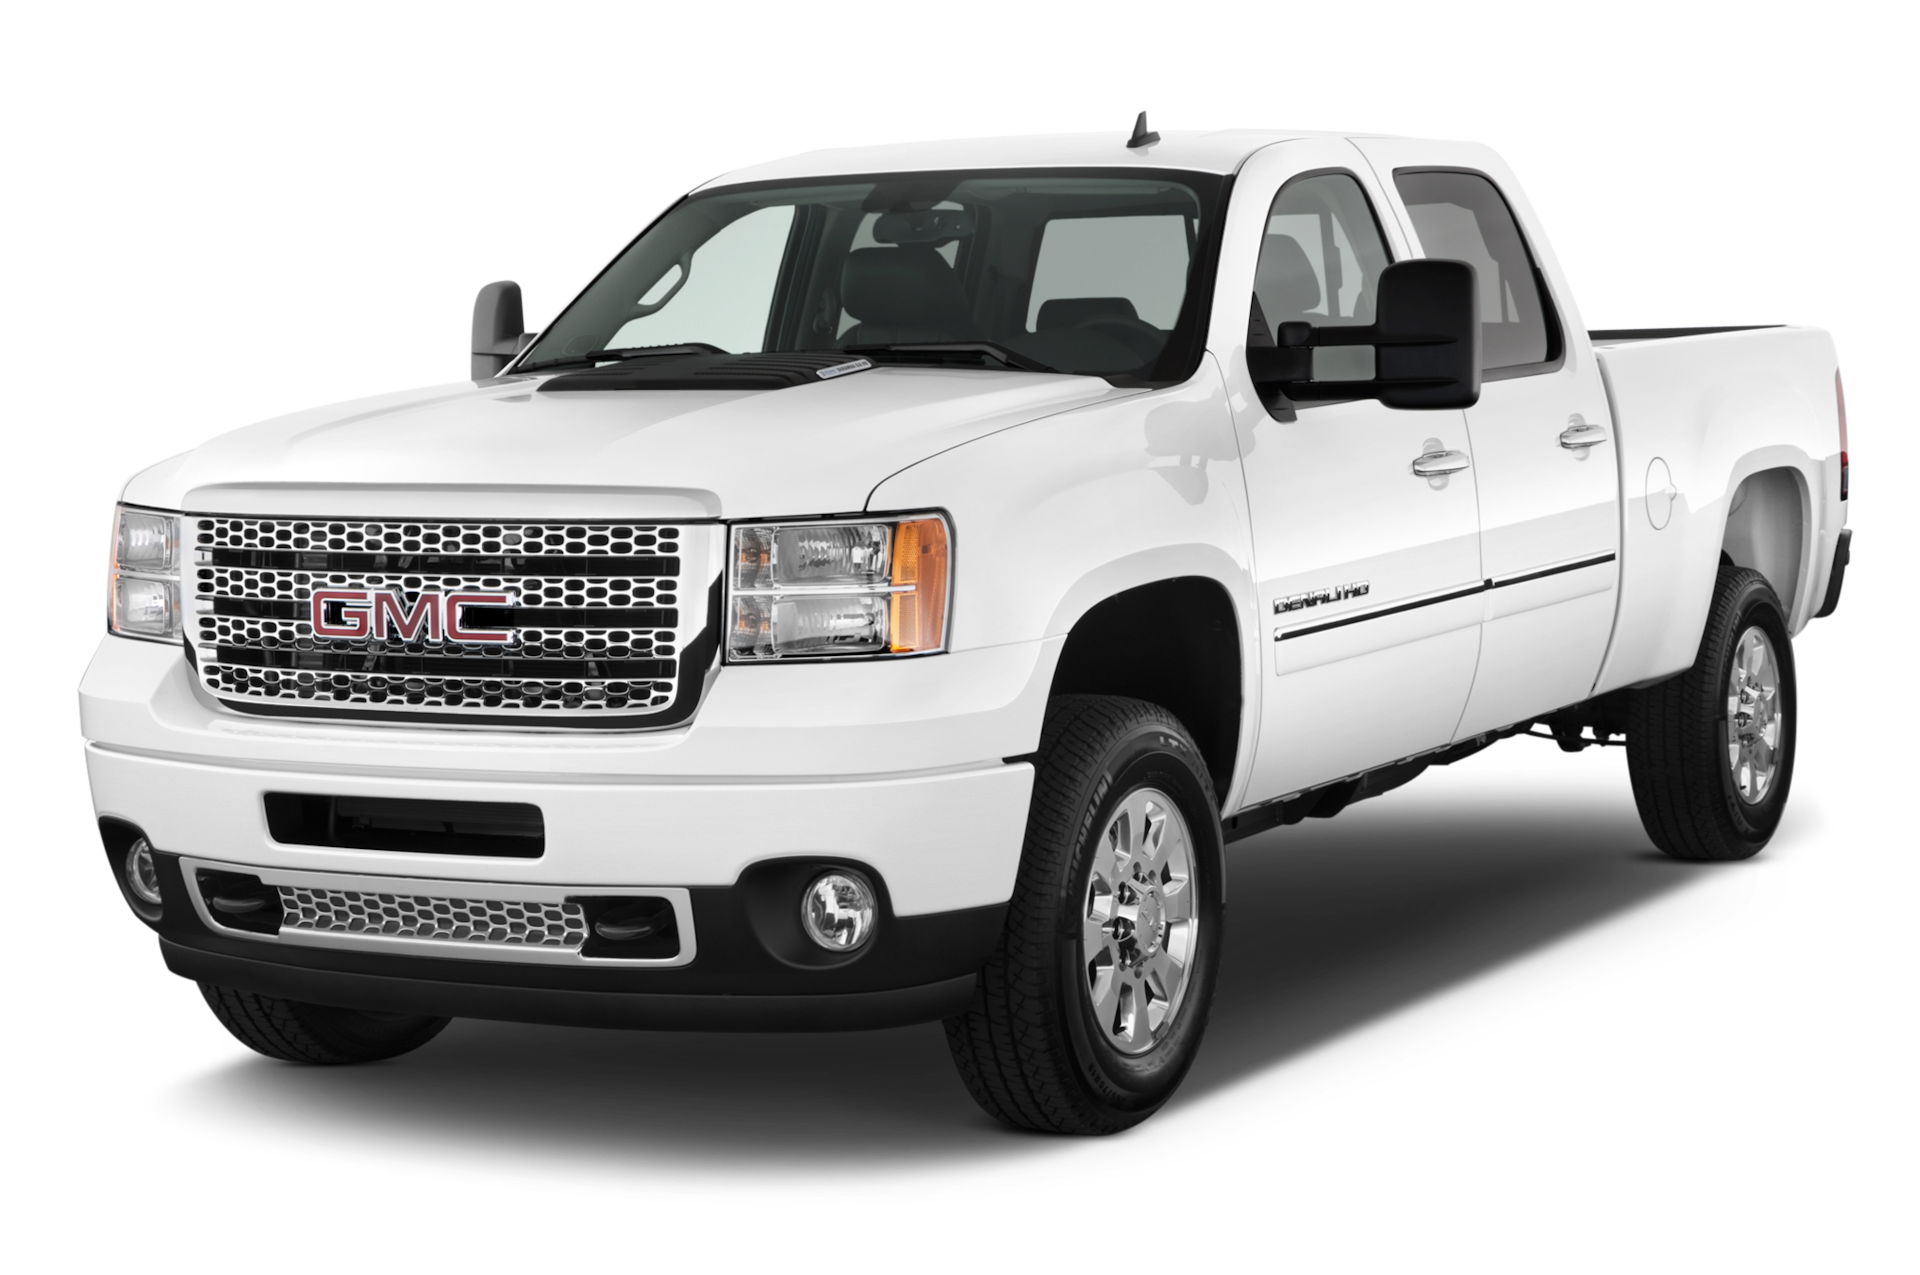 2014 GMC Sierra 2500HD Prices, Reviews, and Photos - MotorTrend